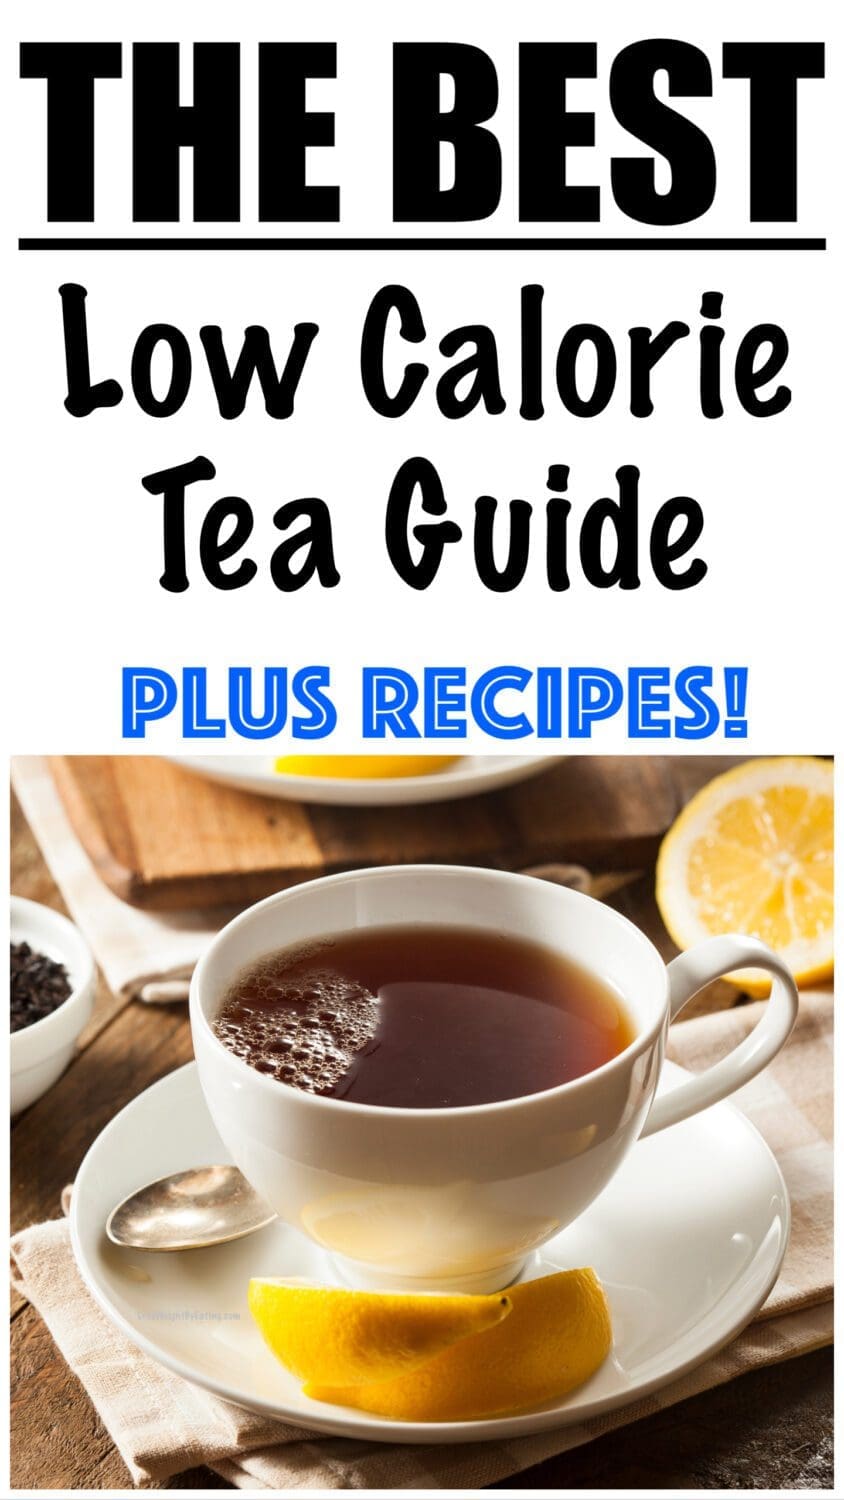 How Many Calories are in Tea